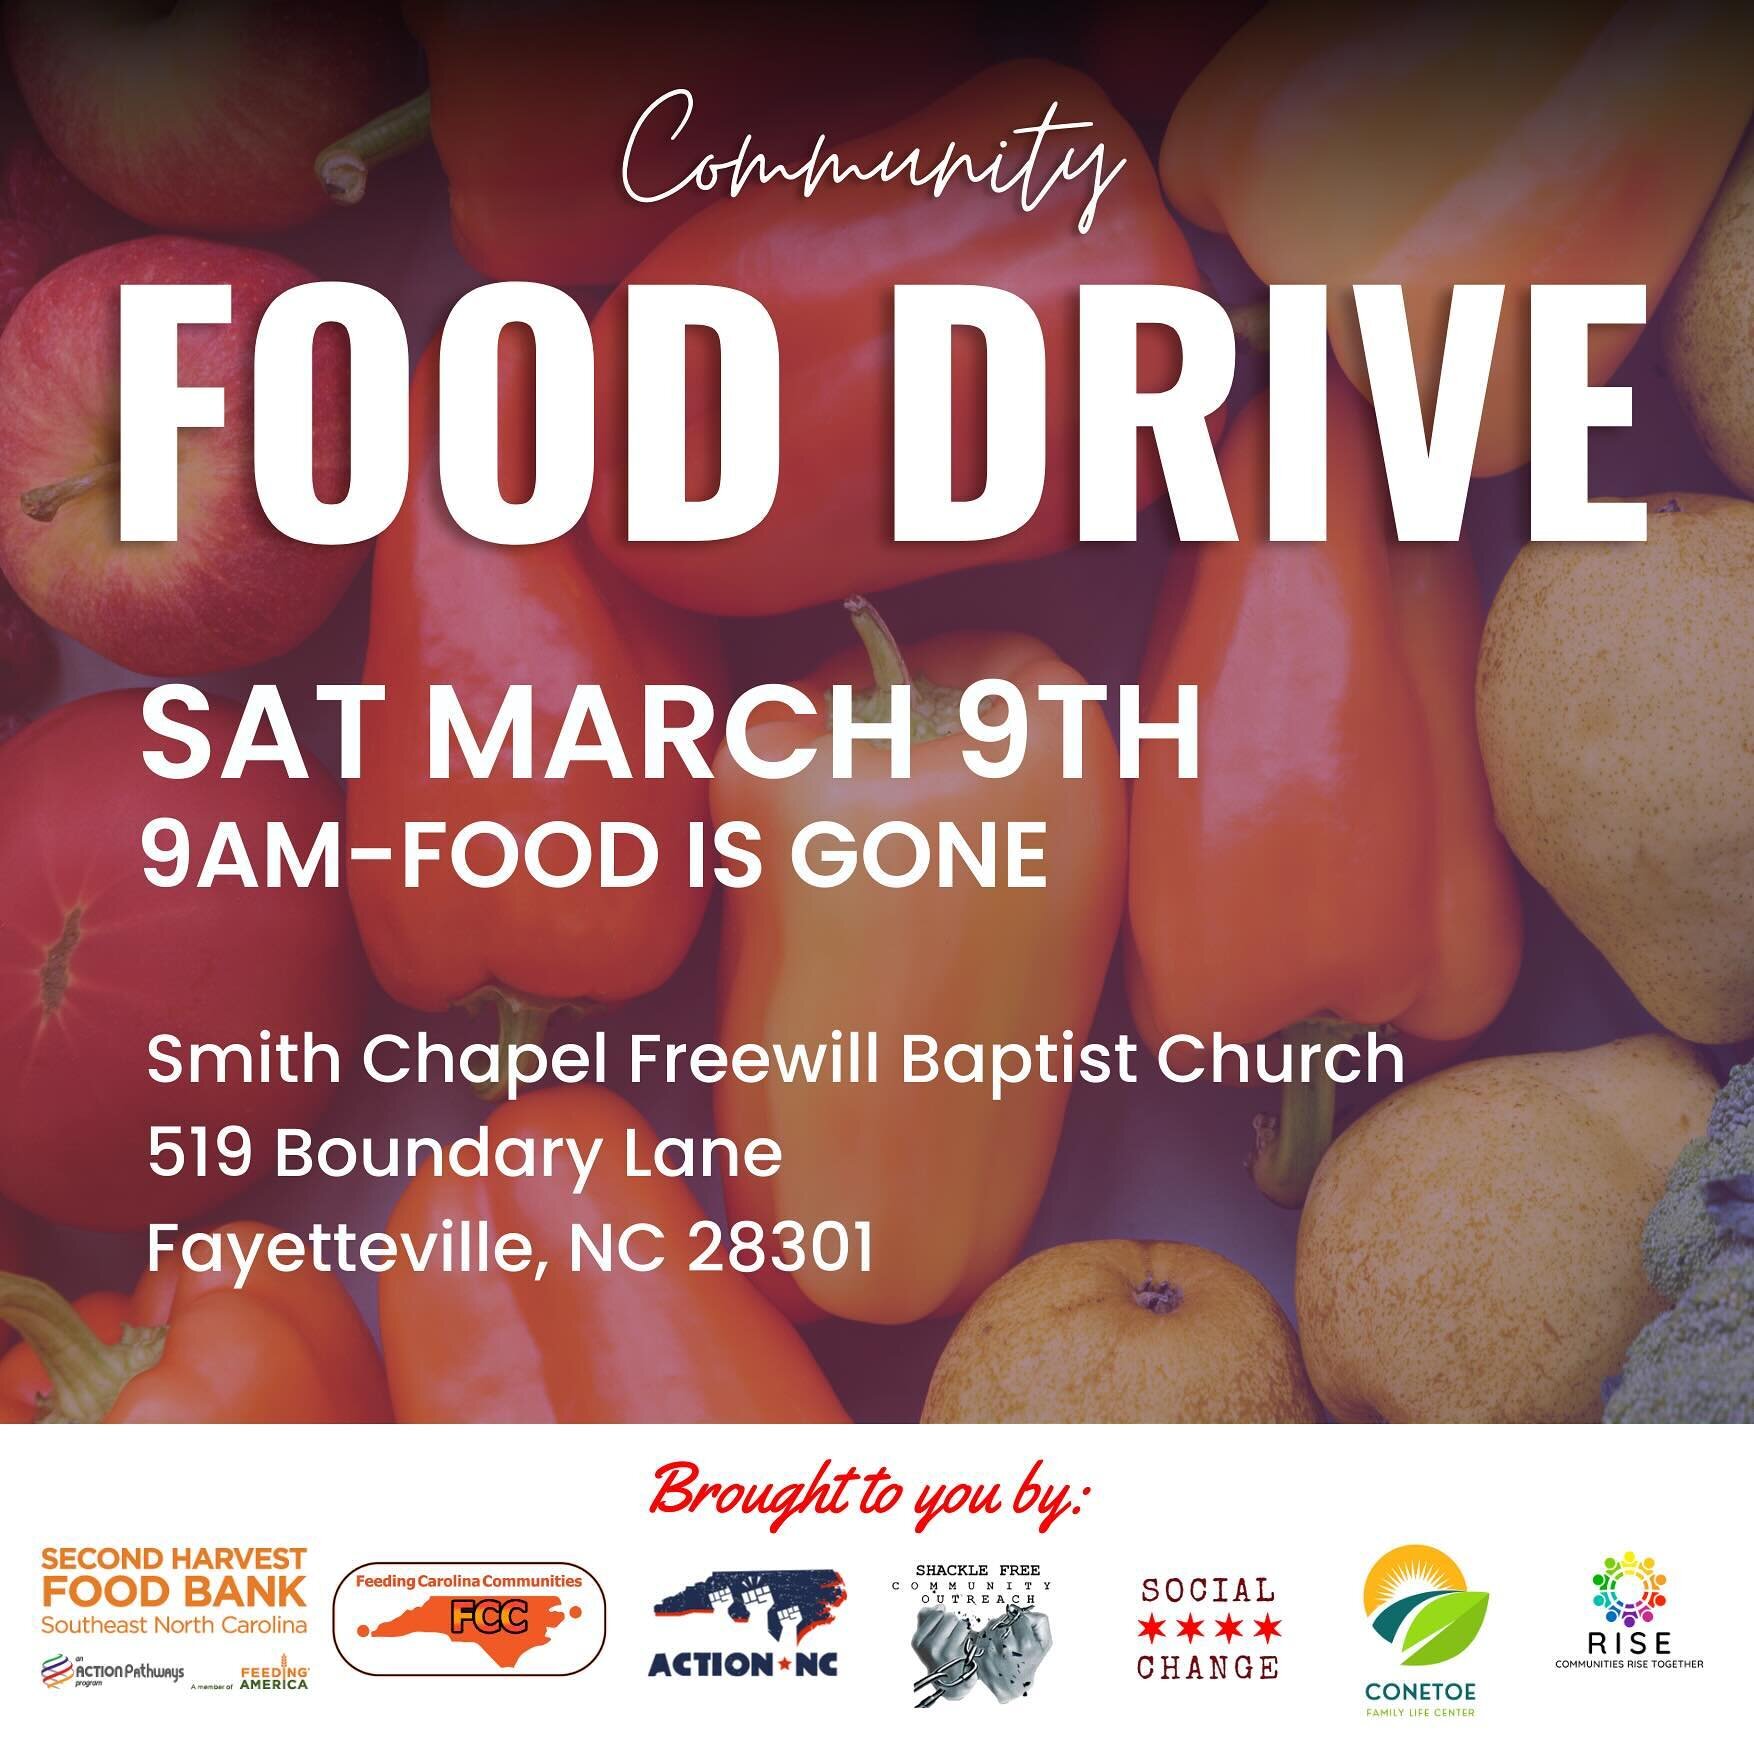 Join us for a community food drive! 

🗓️ Sat. March 9th
⏰9am- food is gone
📍519 Boundary Lane
Fayetteville, NC 28301

Brought to you by: @shacklefreeinformational @conetoefamilyfarm @action.nc @rise4all_org @ncsocialchange 

#socialchange #fooddriv